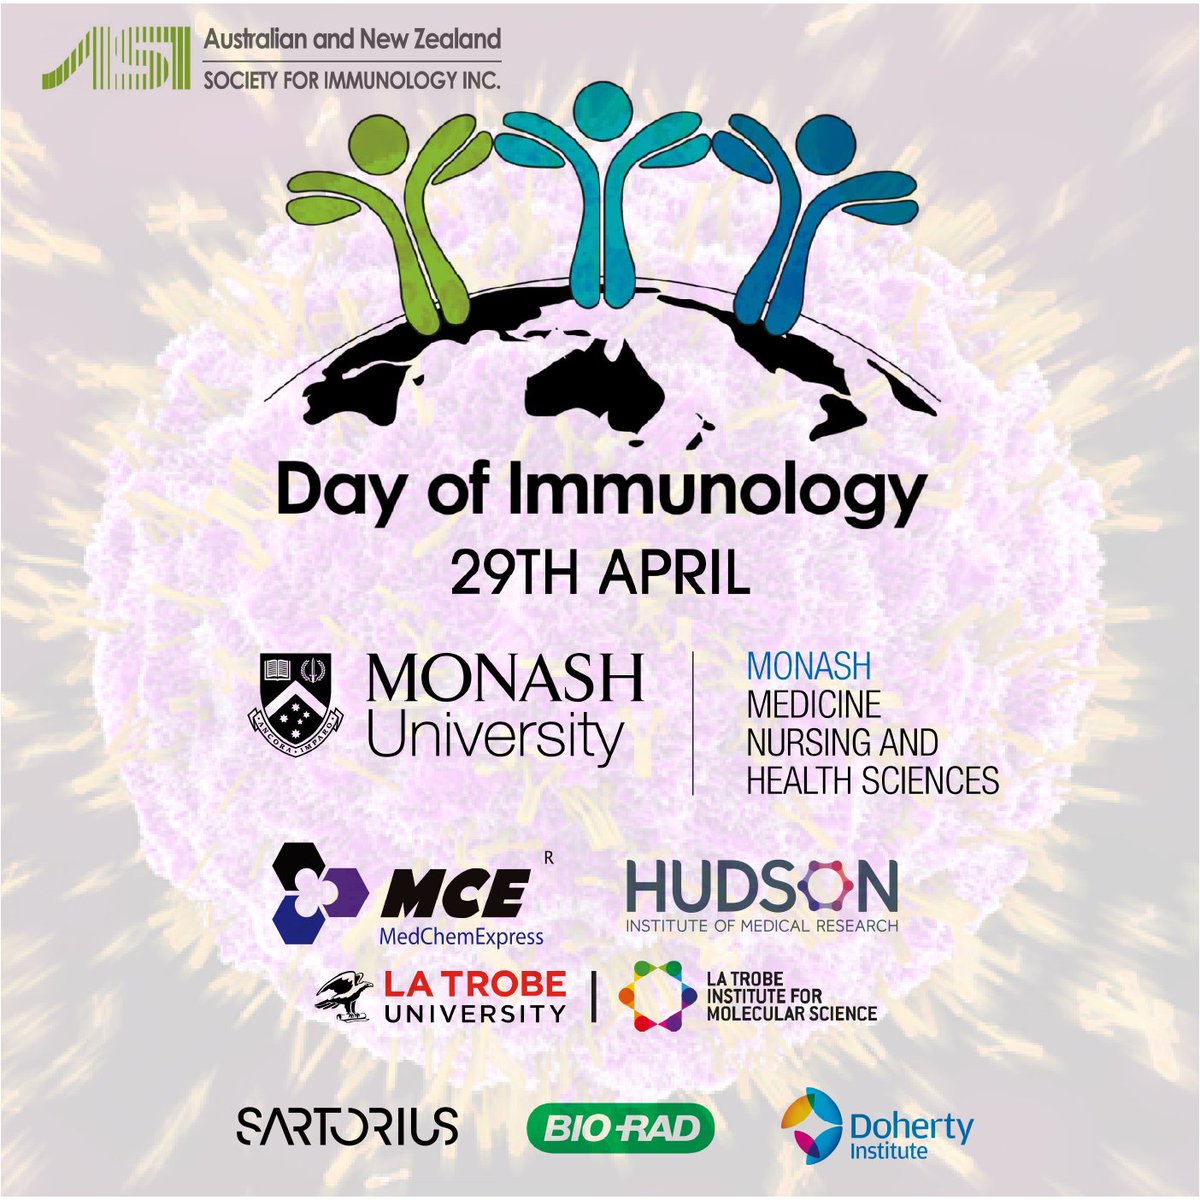 Thanks Prof Claudia Nold for speaking about early life immunity to help us celebrate the #DayOfImmunology tonight. @Hudson_Research And thanks to all our passionate volunteers, our sponsors, and host @TheDohertyInst for making this event possible!